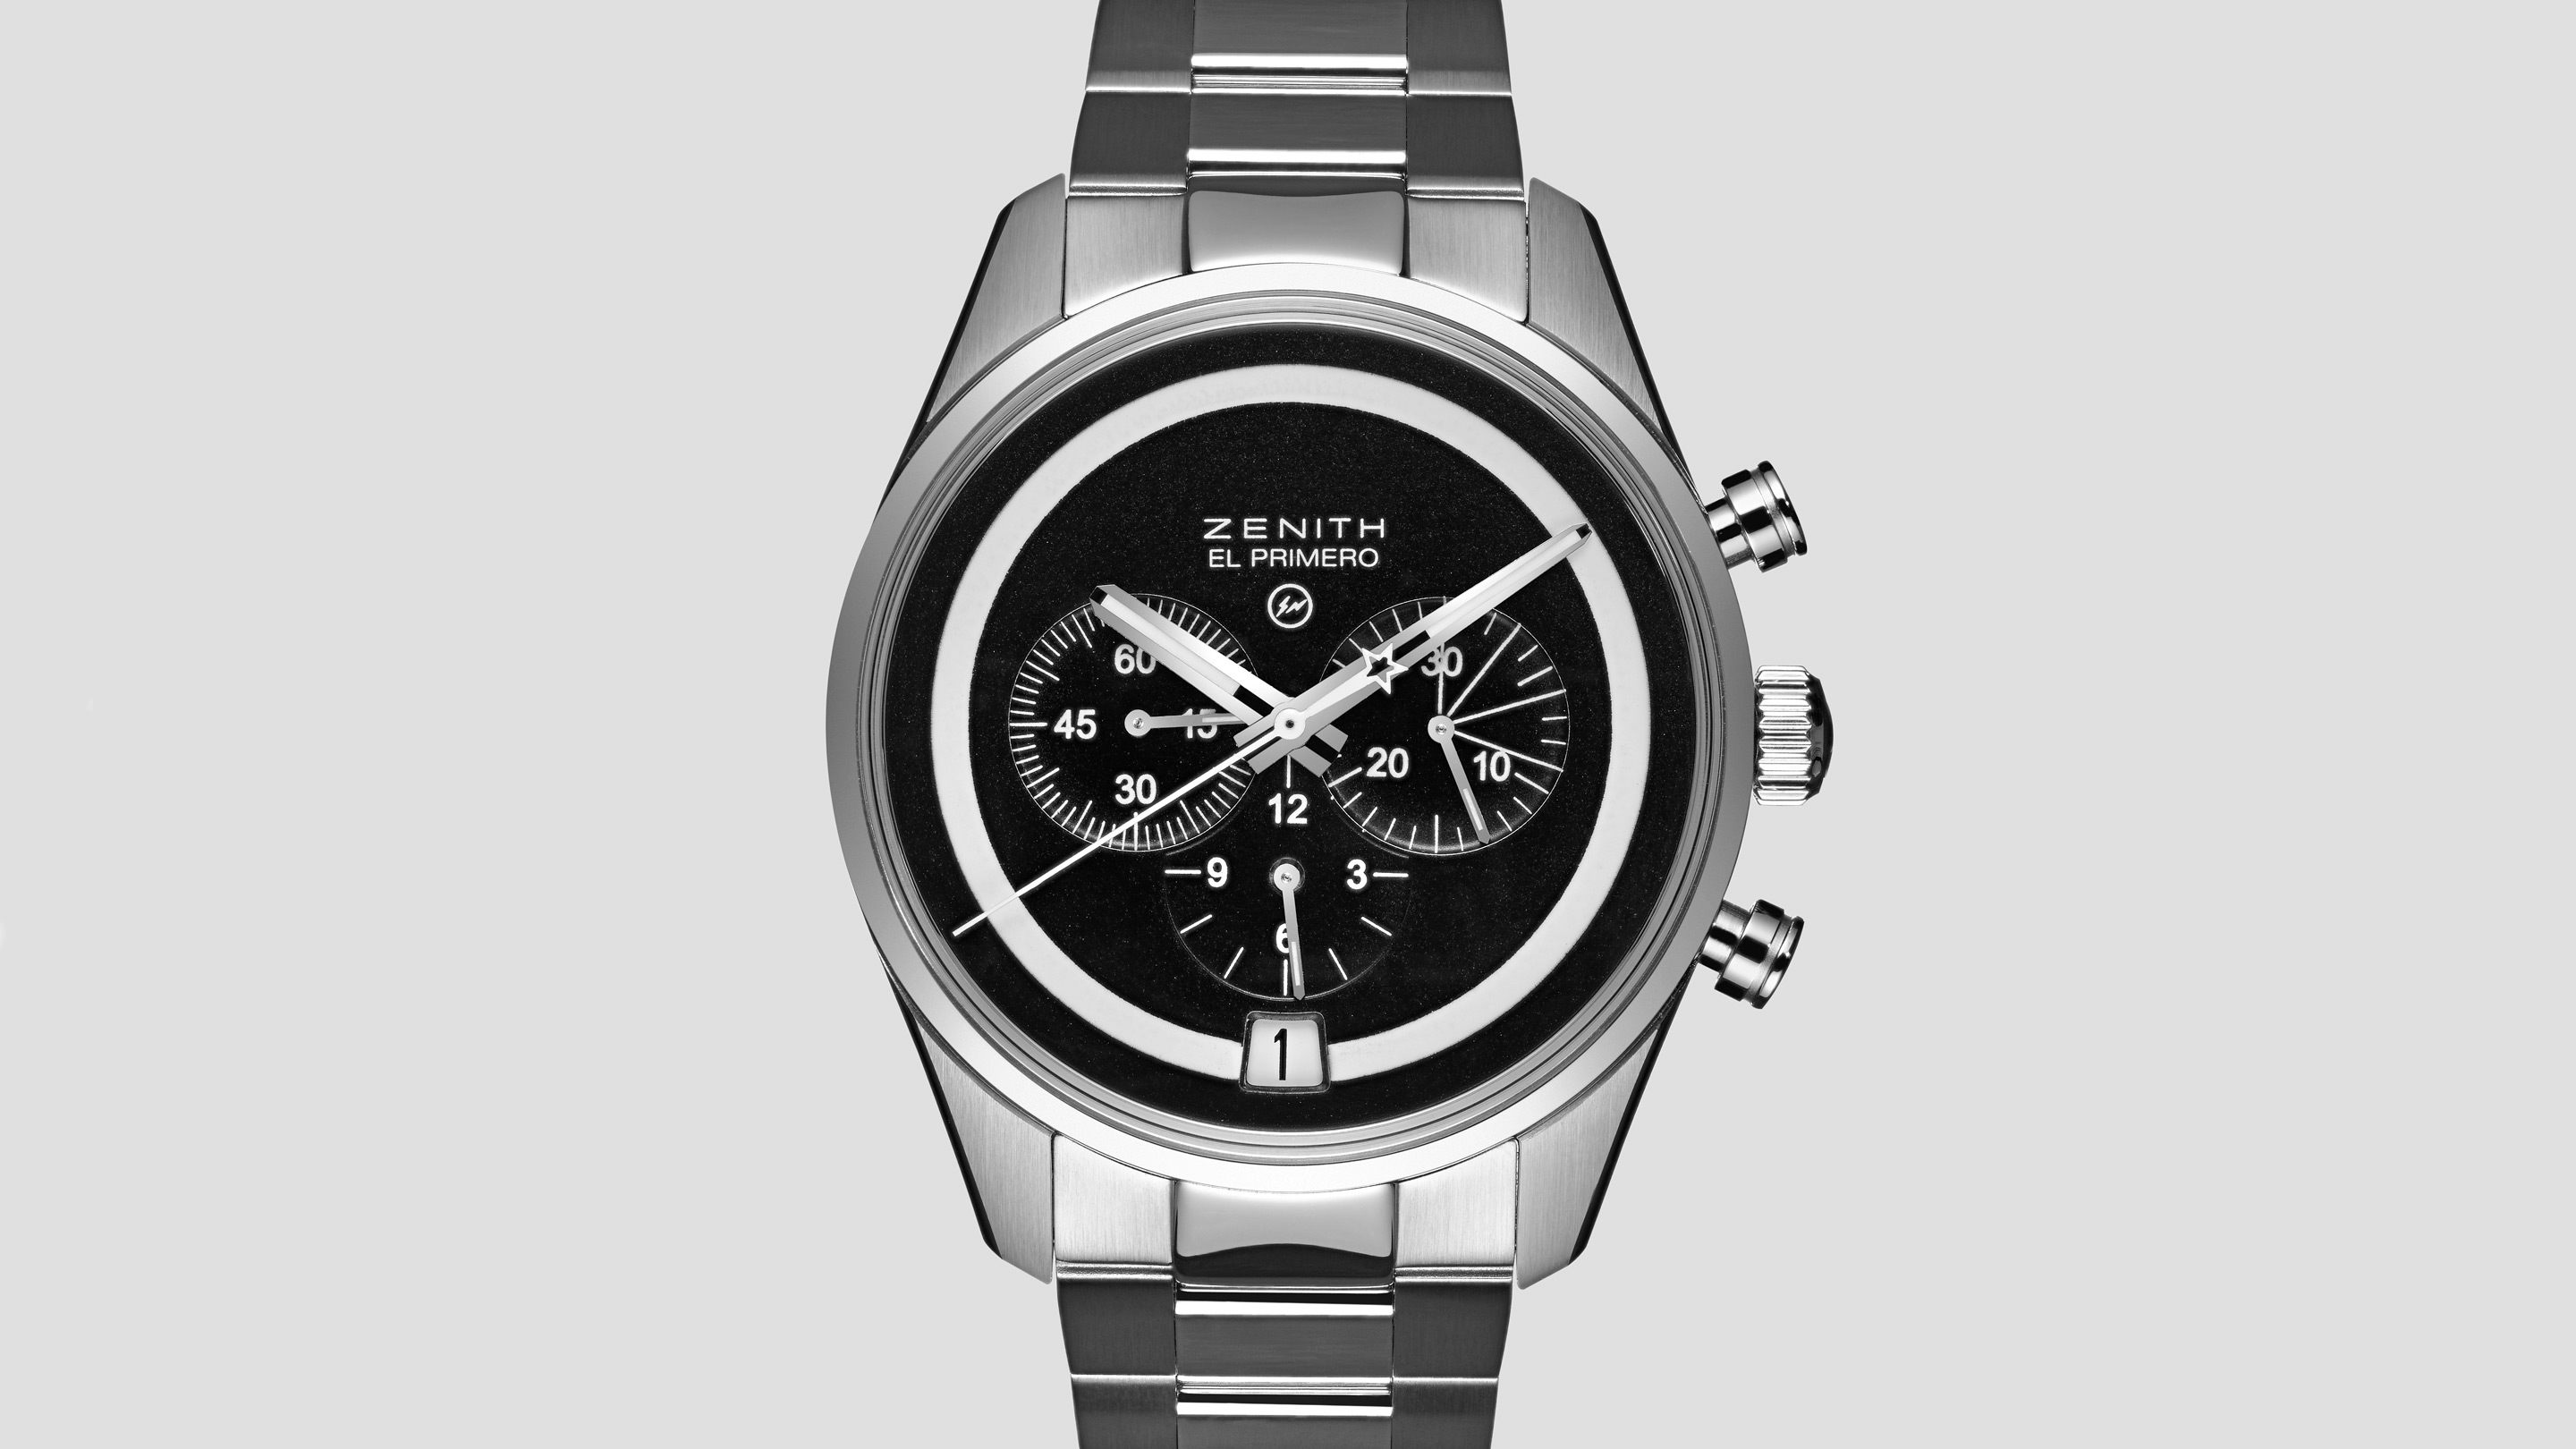 BY GEORGE! — BAMFORD WATCH DEPARTMENT GOES LEGIT WITH ZENITH